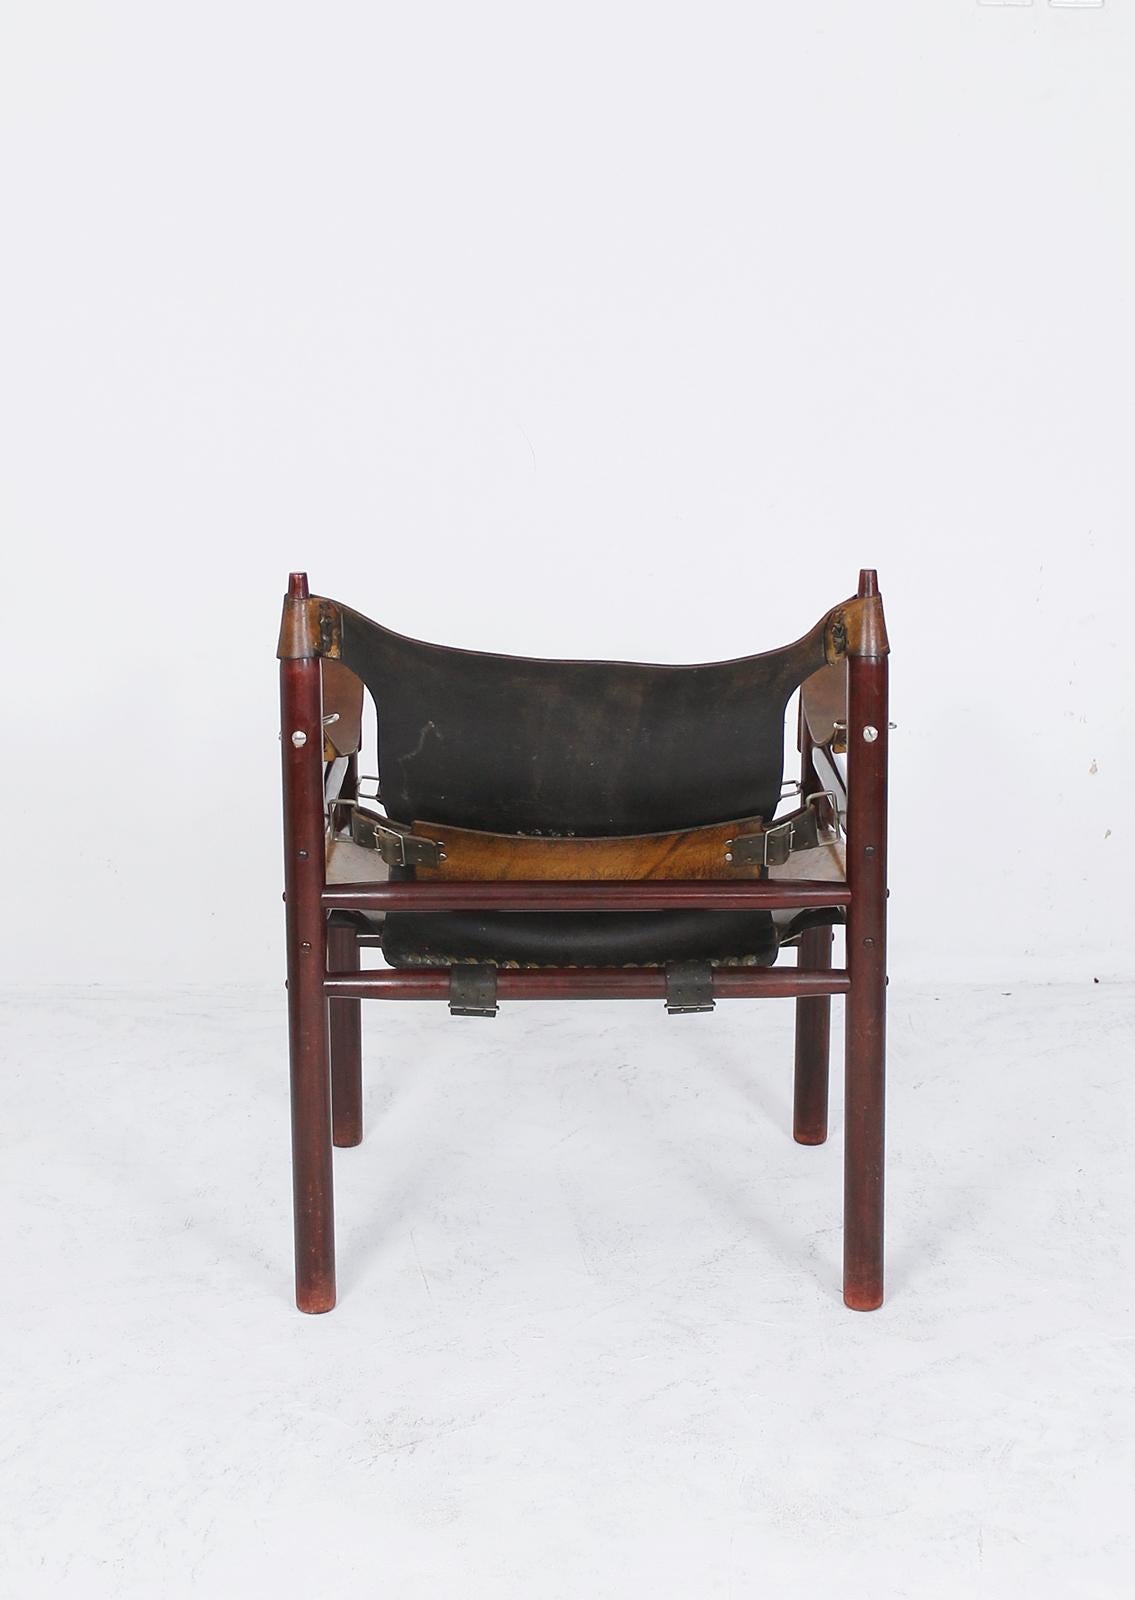 Turned Vintage Safari Armchair in the Manner of Arne Norell 1970s Hungary